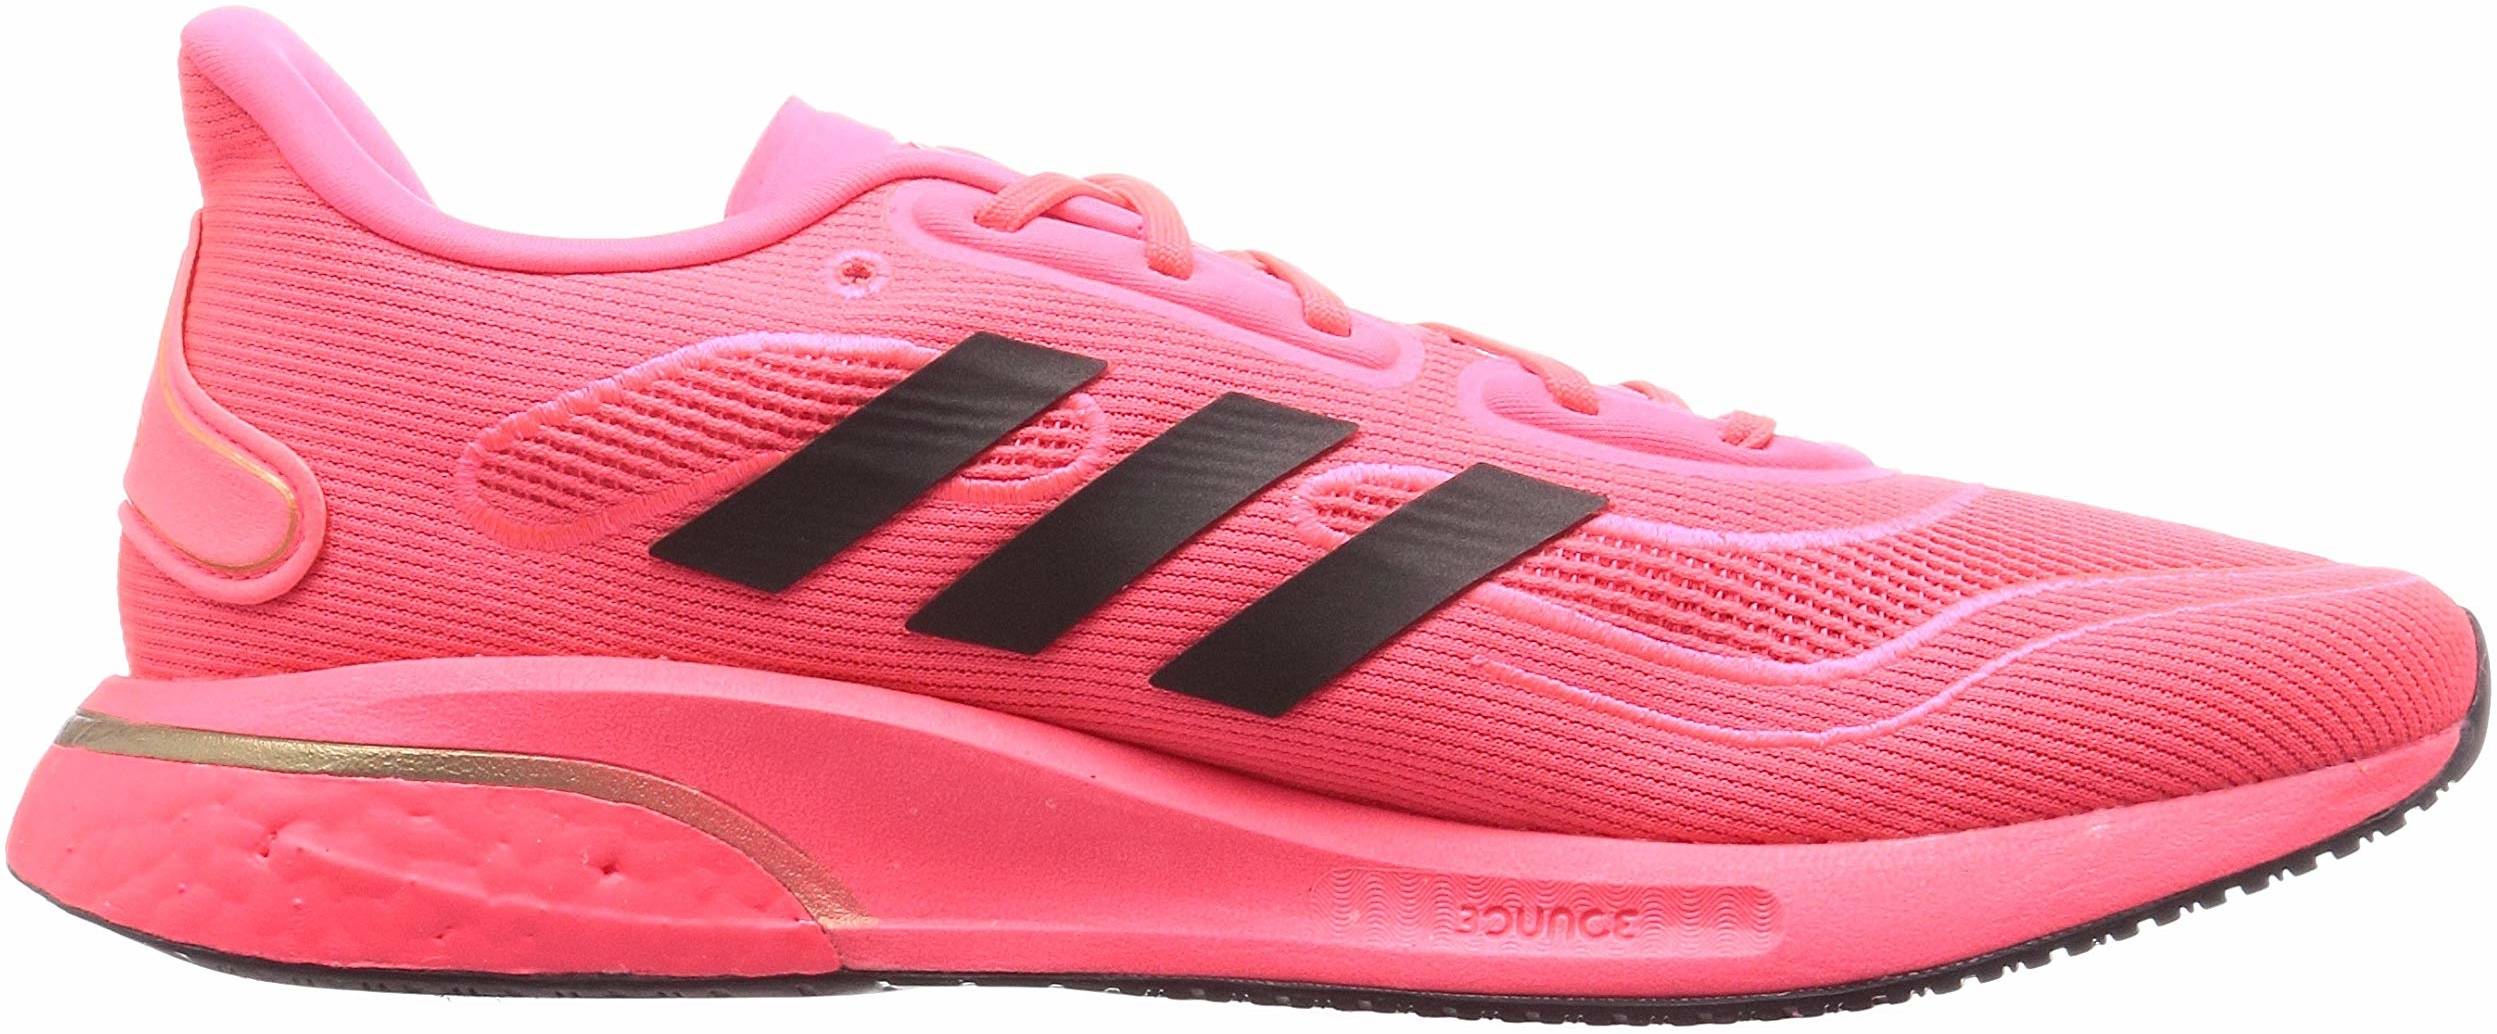 Only $24 + Review of Adidas Supernova 